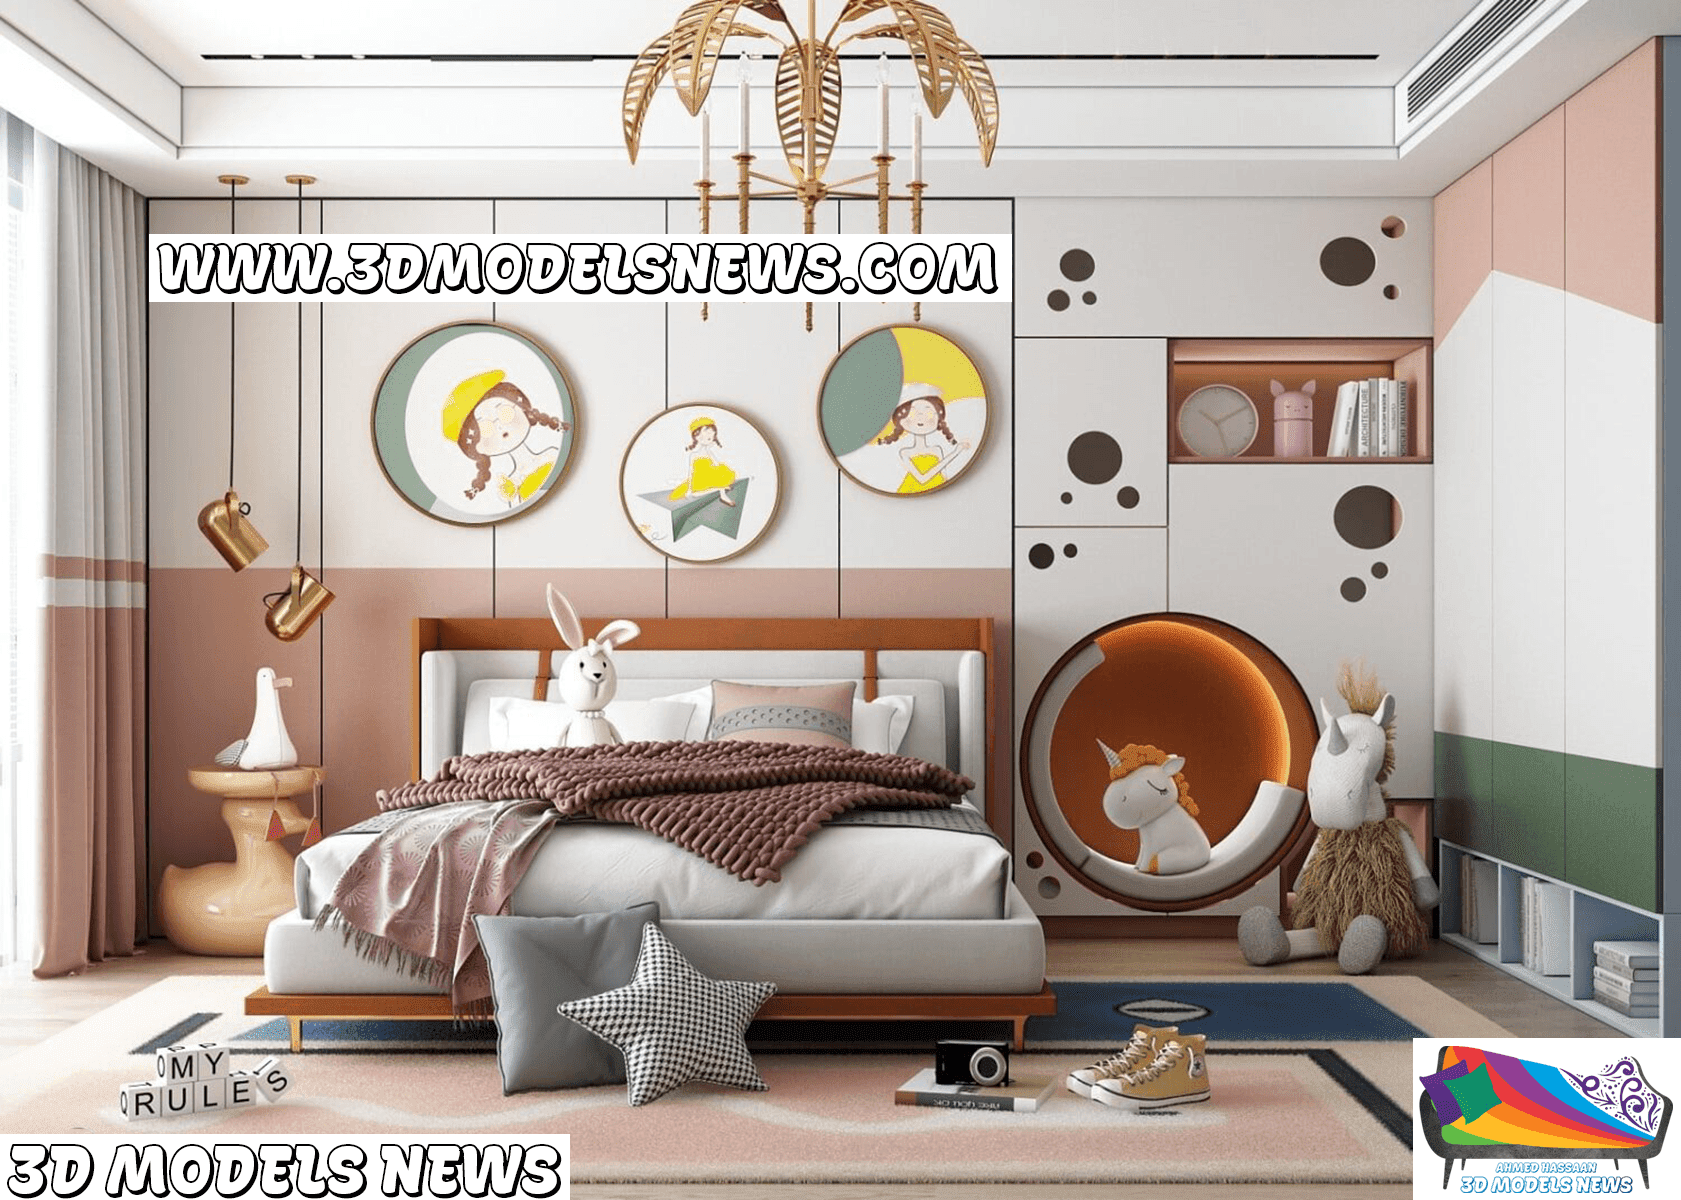 Interior scene for a girls' children's room complete with one bed and all the decor 1